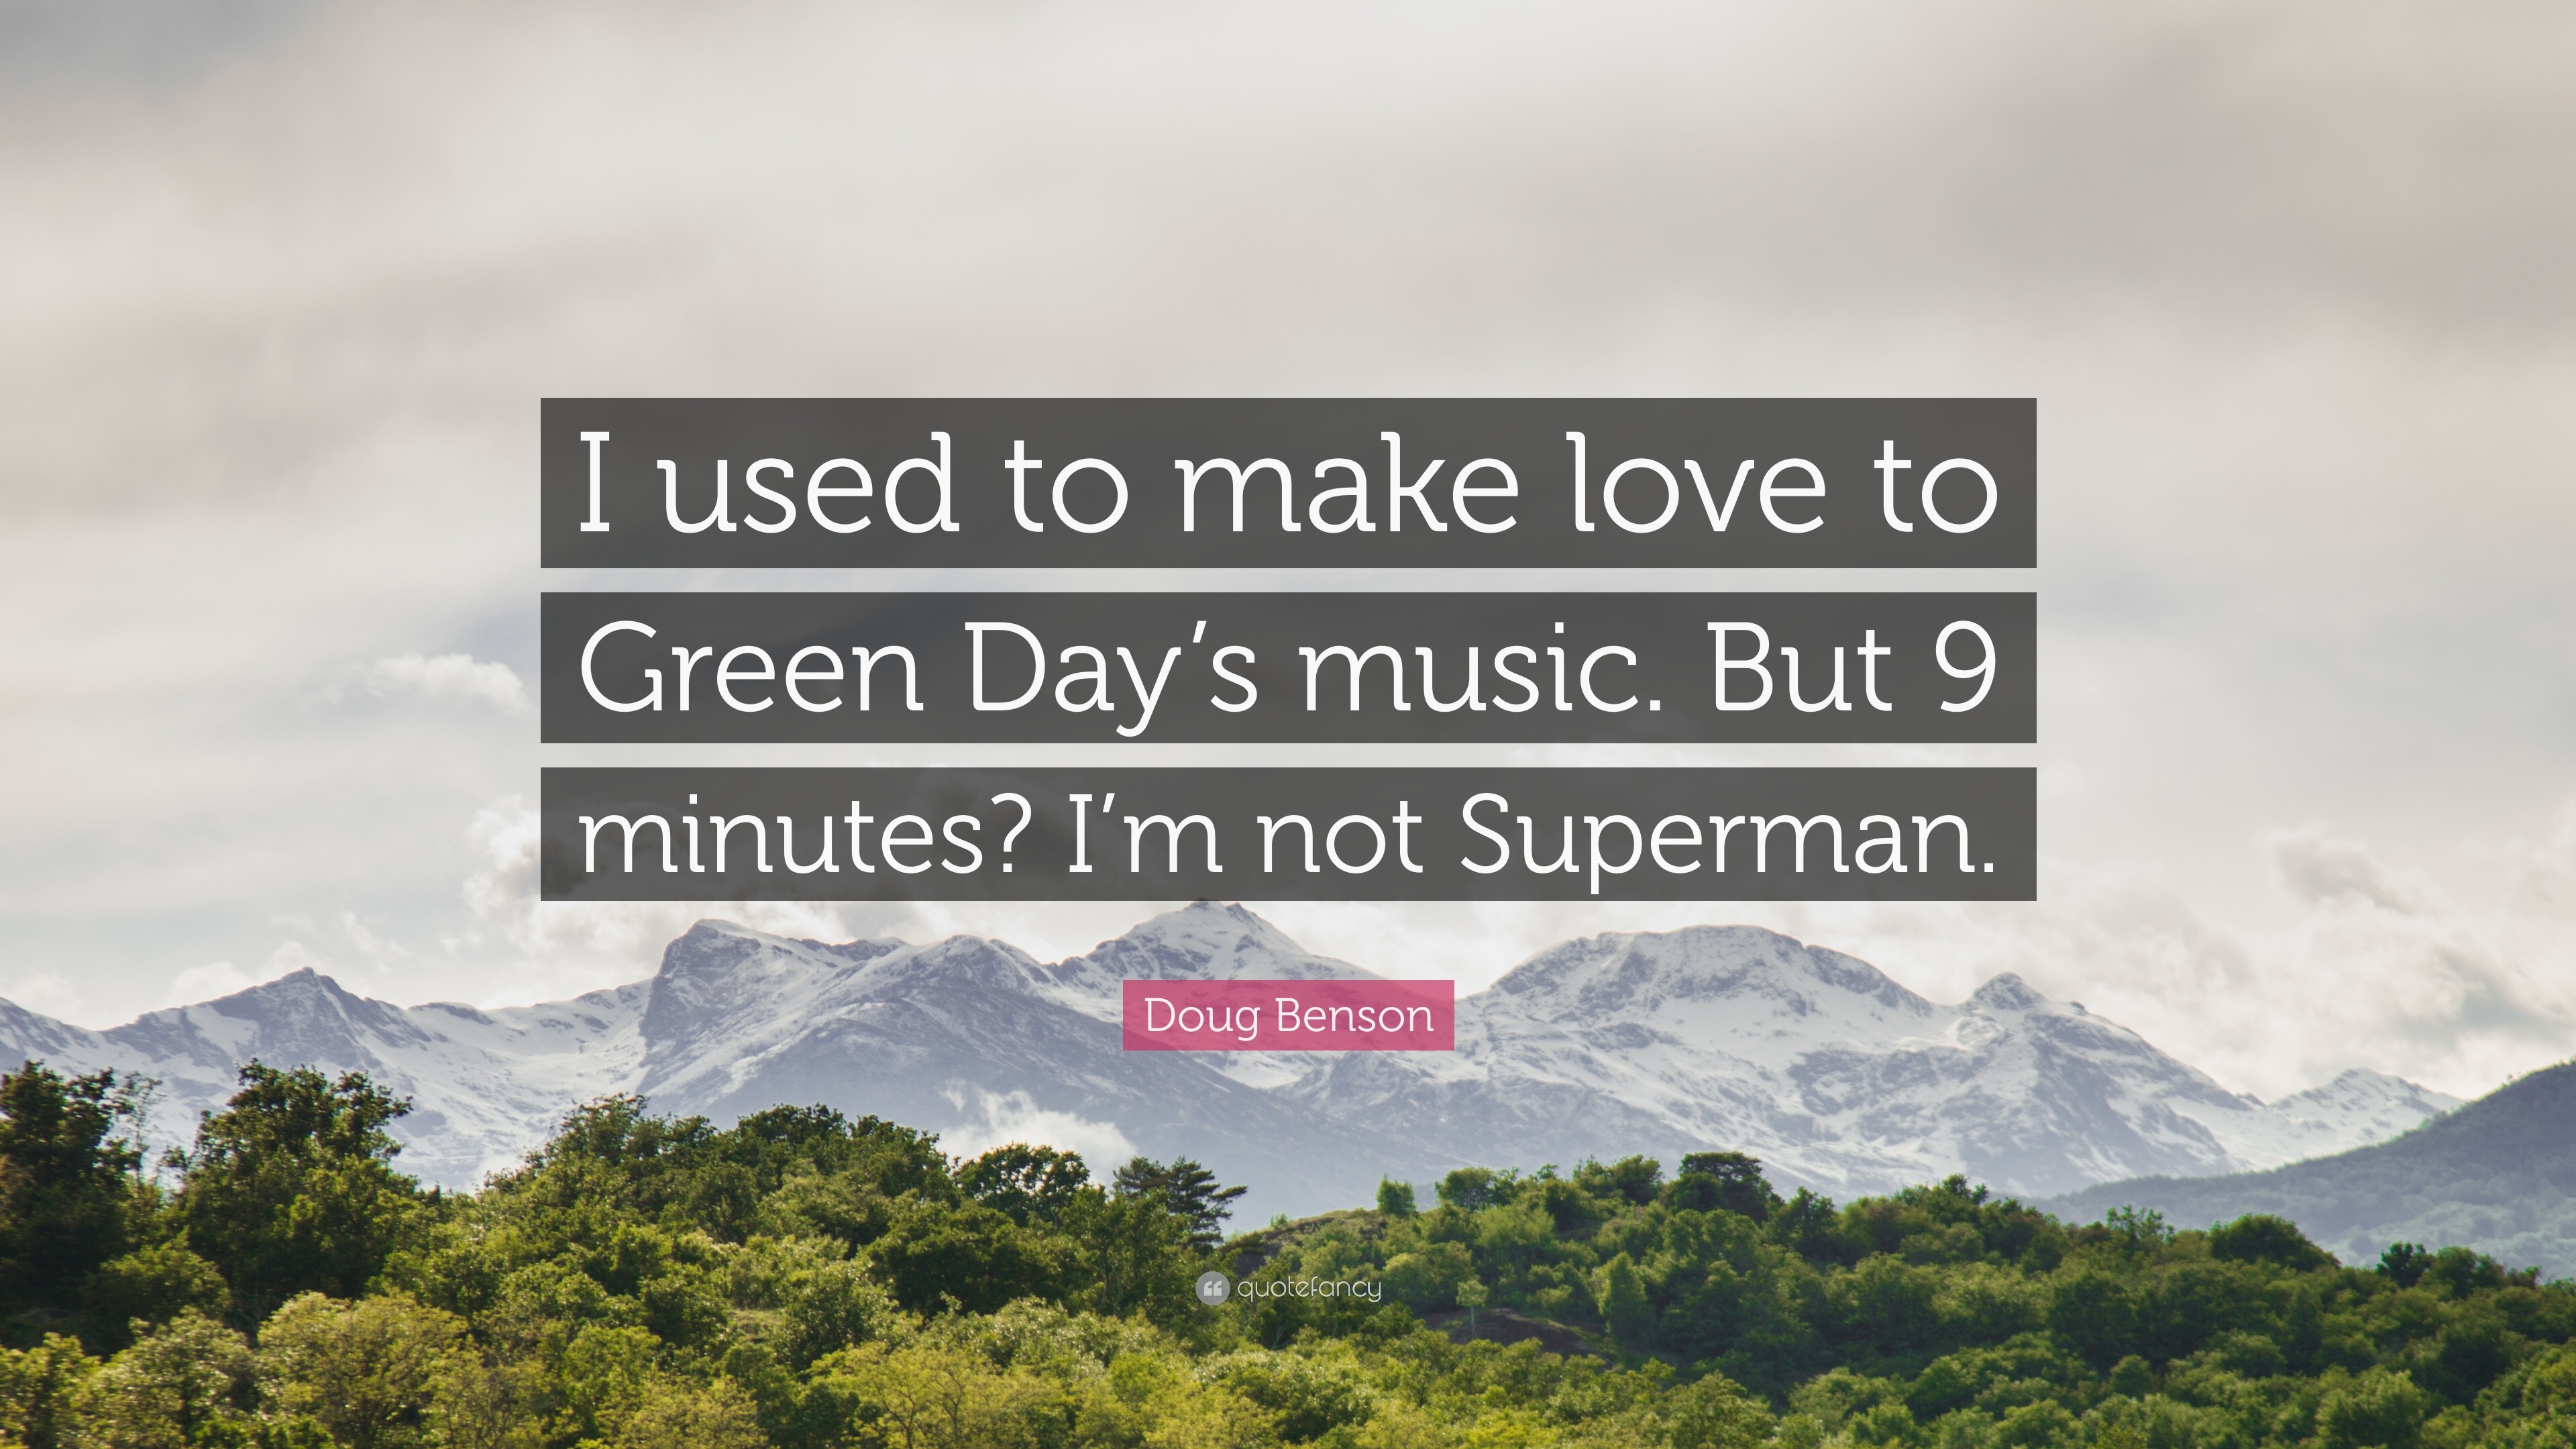 Doug Benson Quote “I used to make love to Green Day s music But